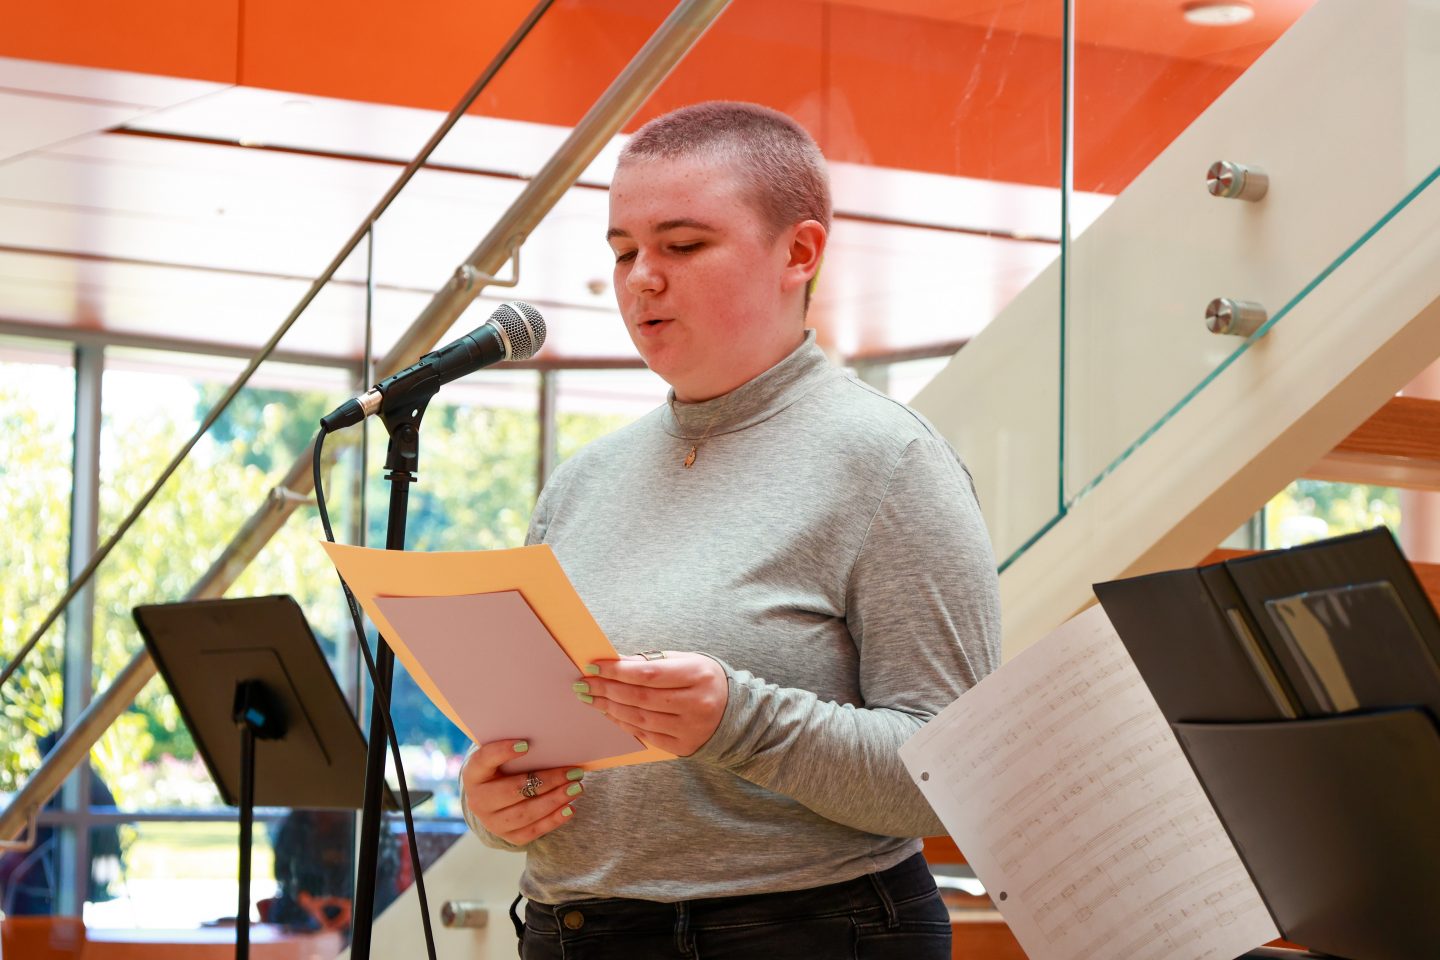 A young woman with a buzz cut wearing a grey shirt is reading from a paper at a microphone